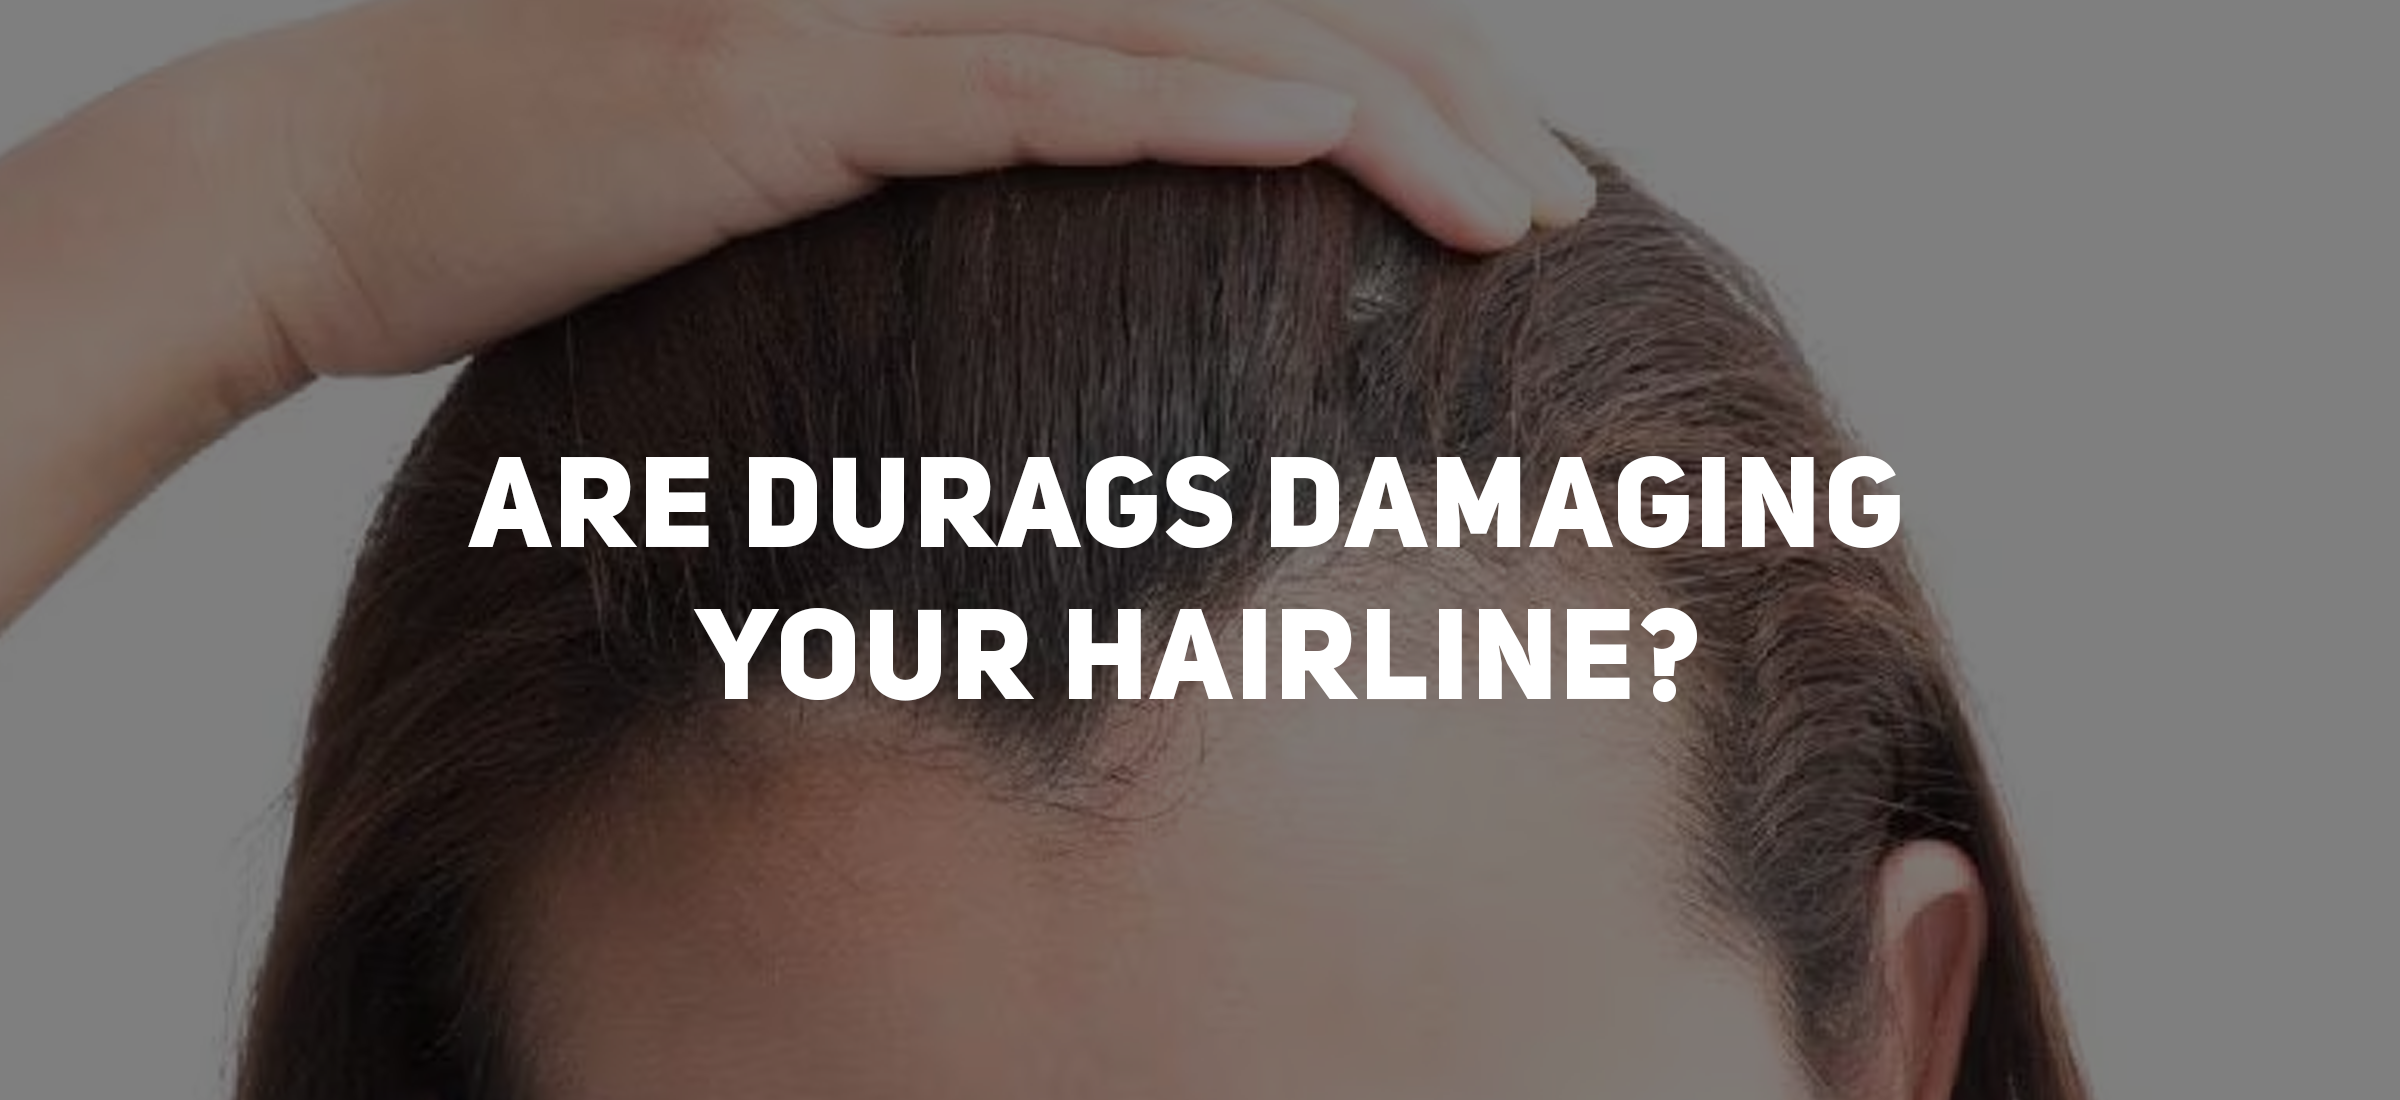 Are Durags Damaging Your Hairline?